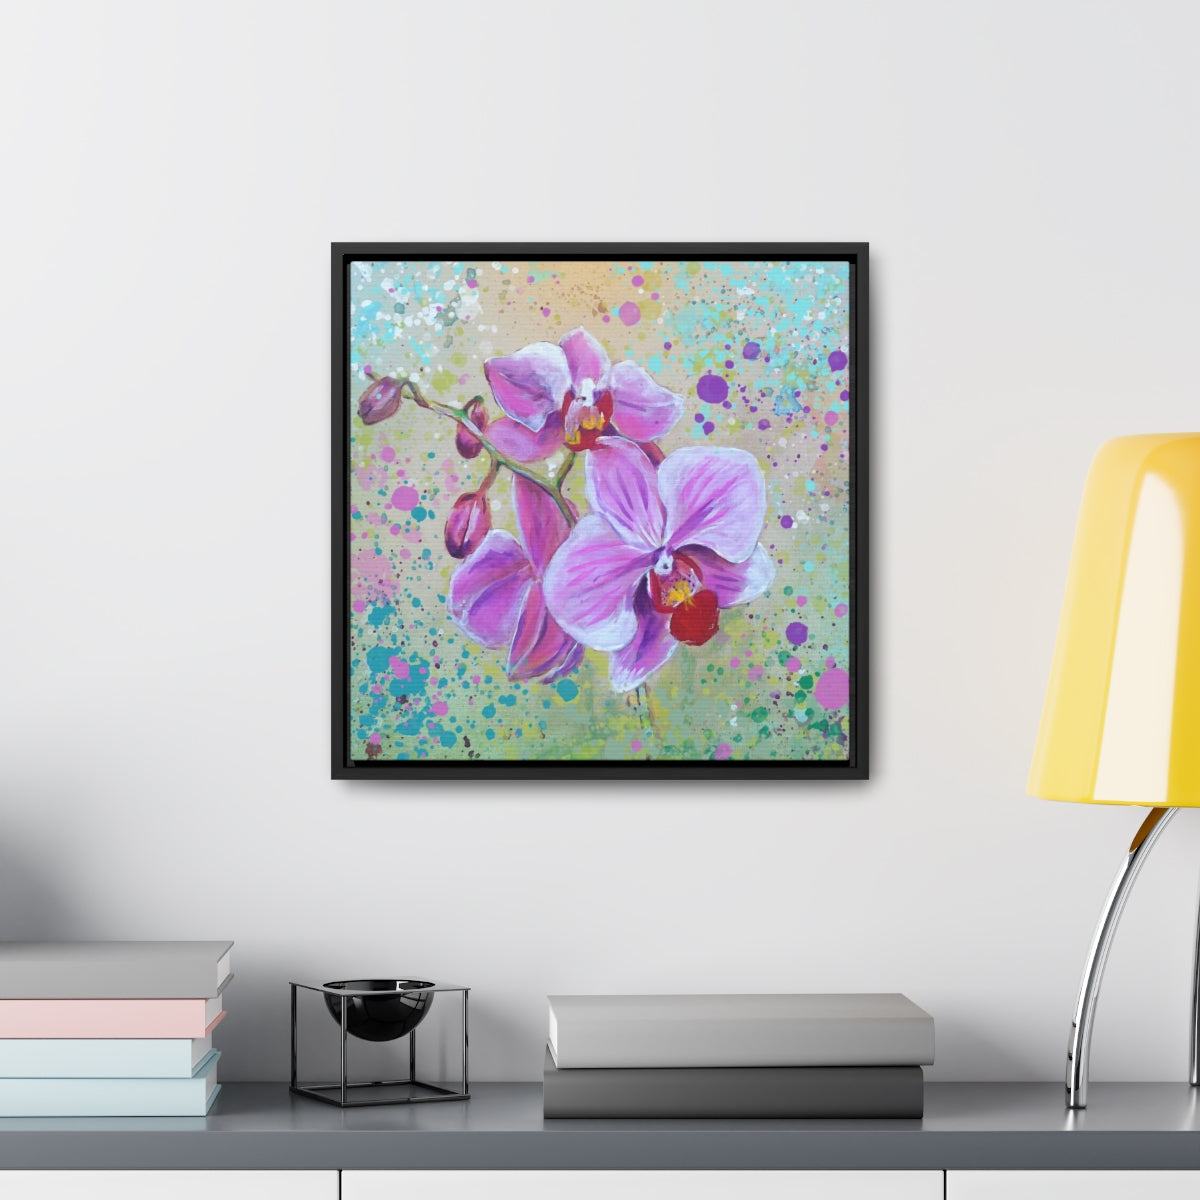 Square Frame Canvas - Pink Orchid